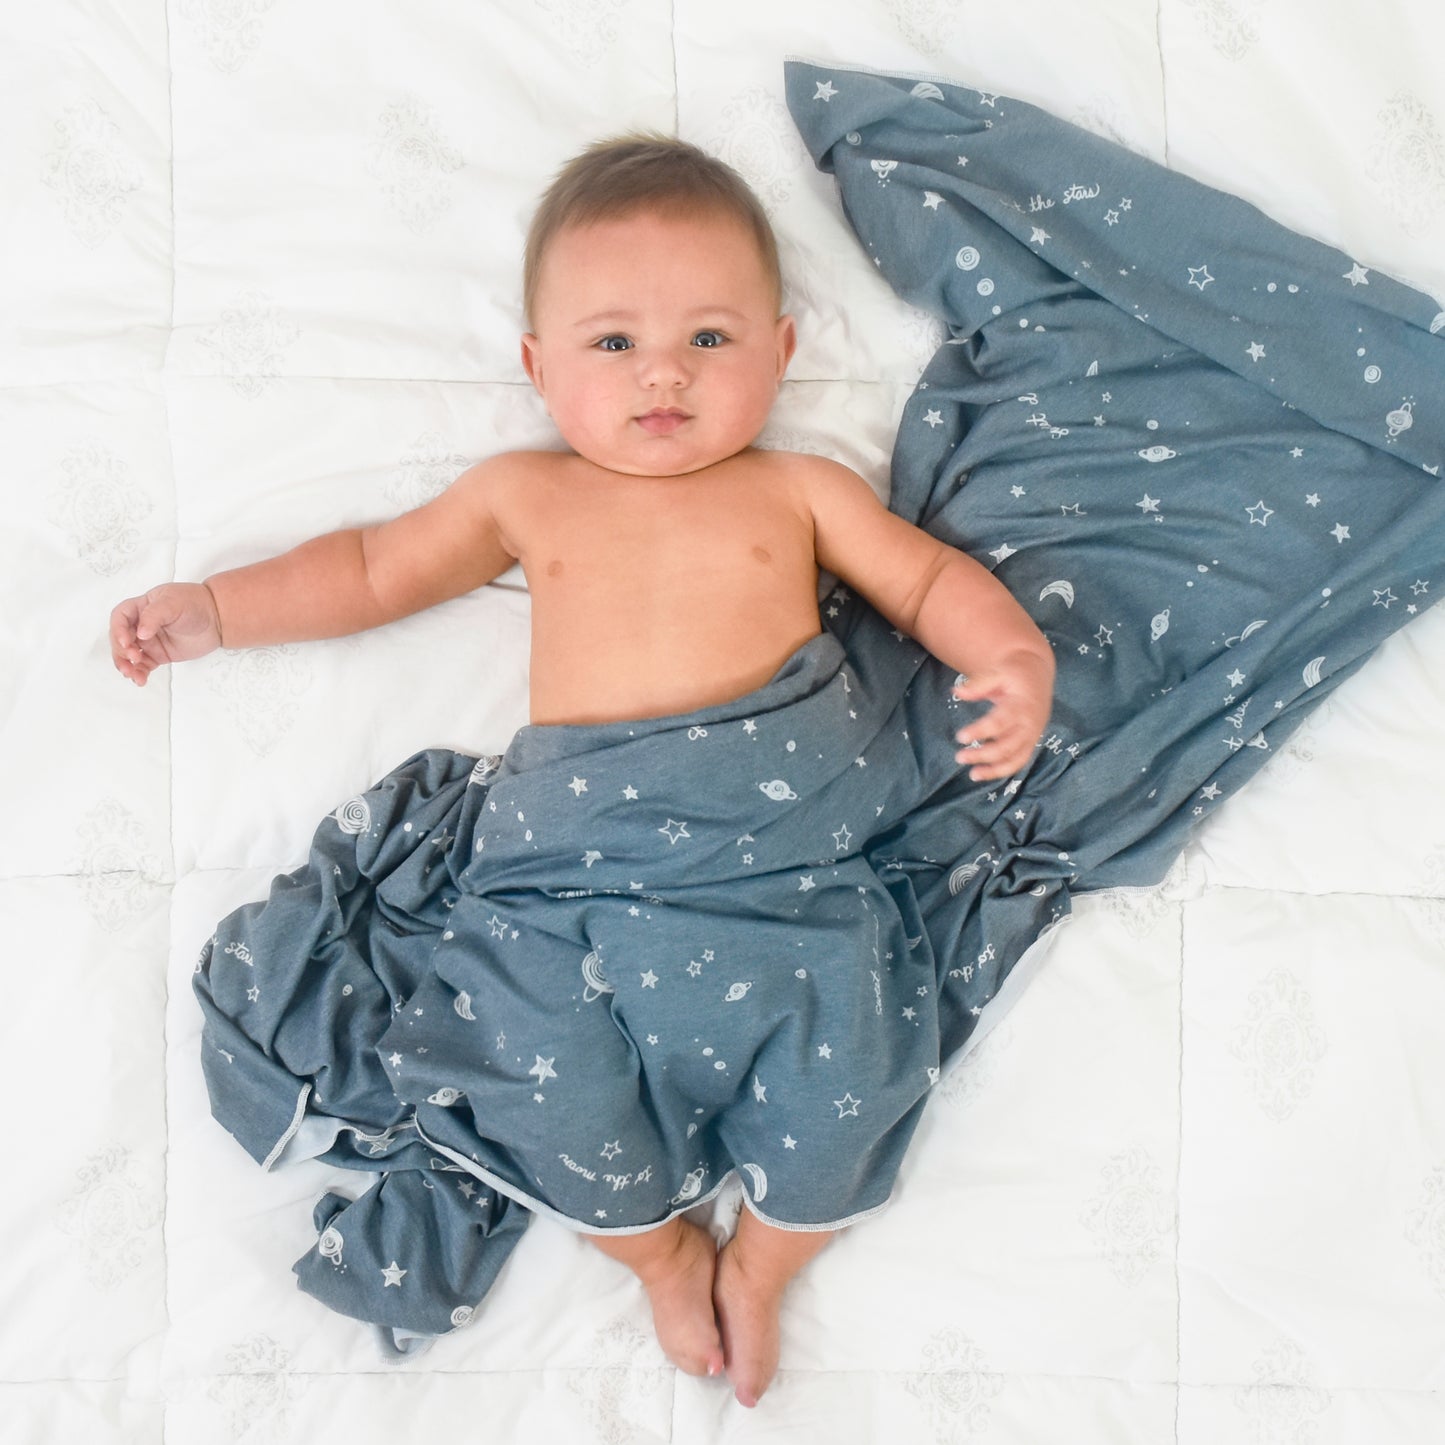 Extra Soft Stretchy Knit Swaddle Blanket: Starry Dreams